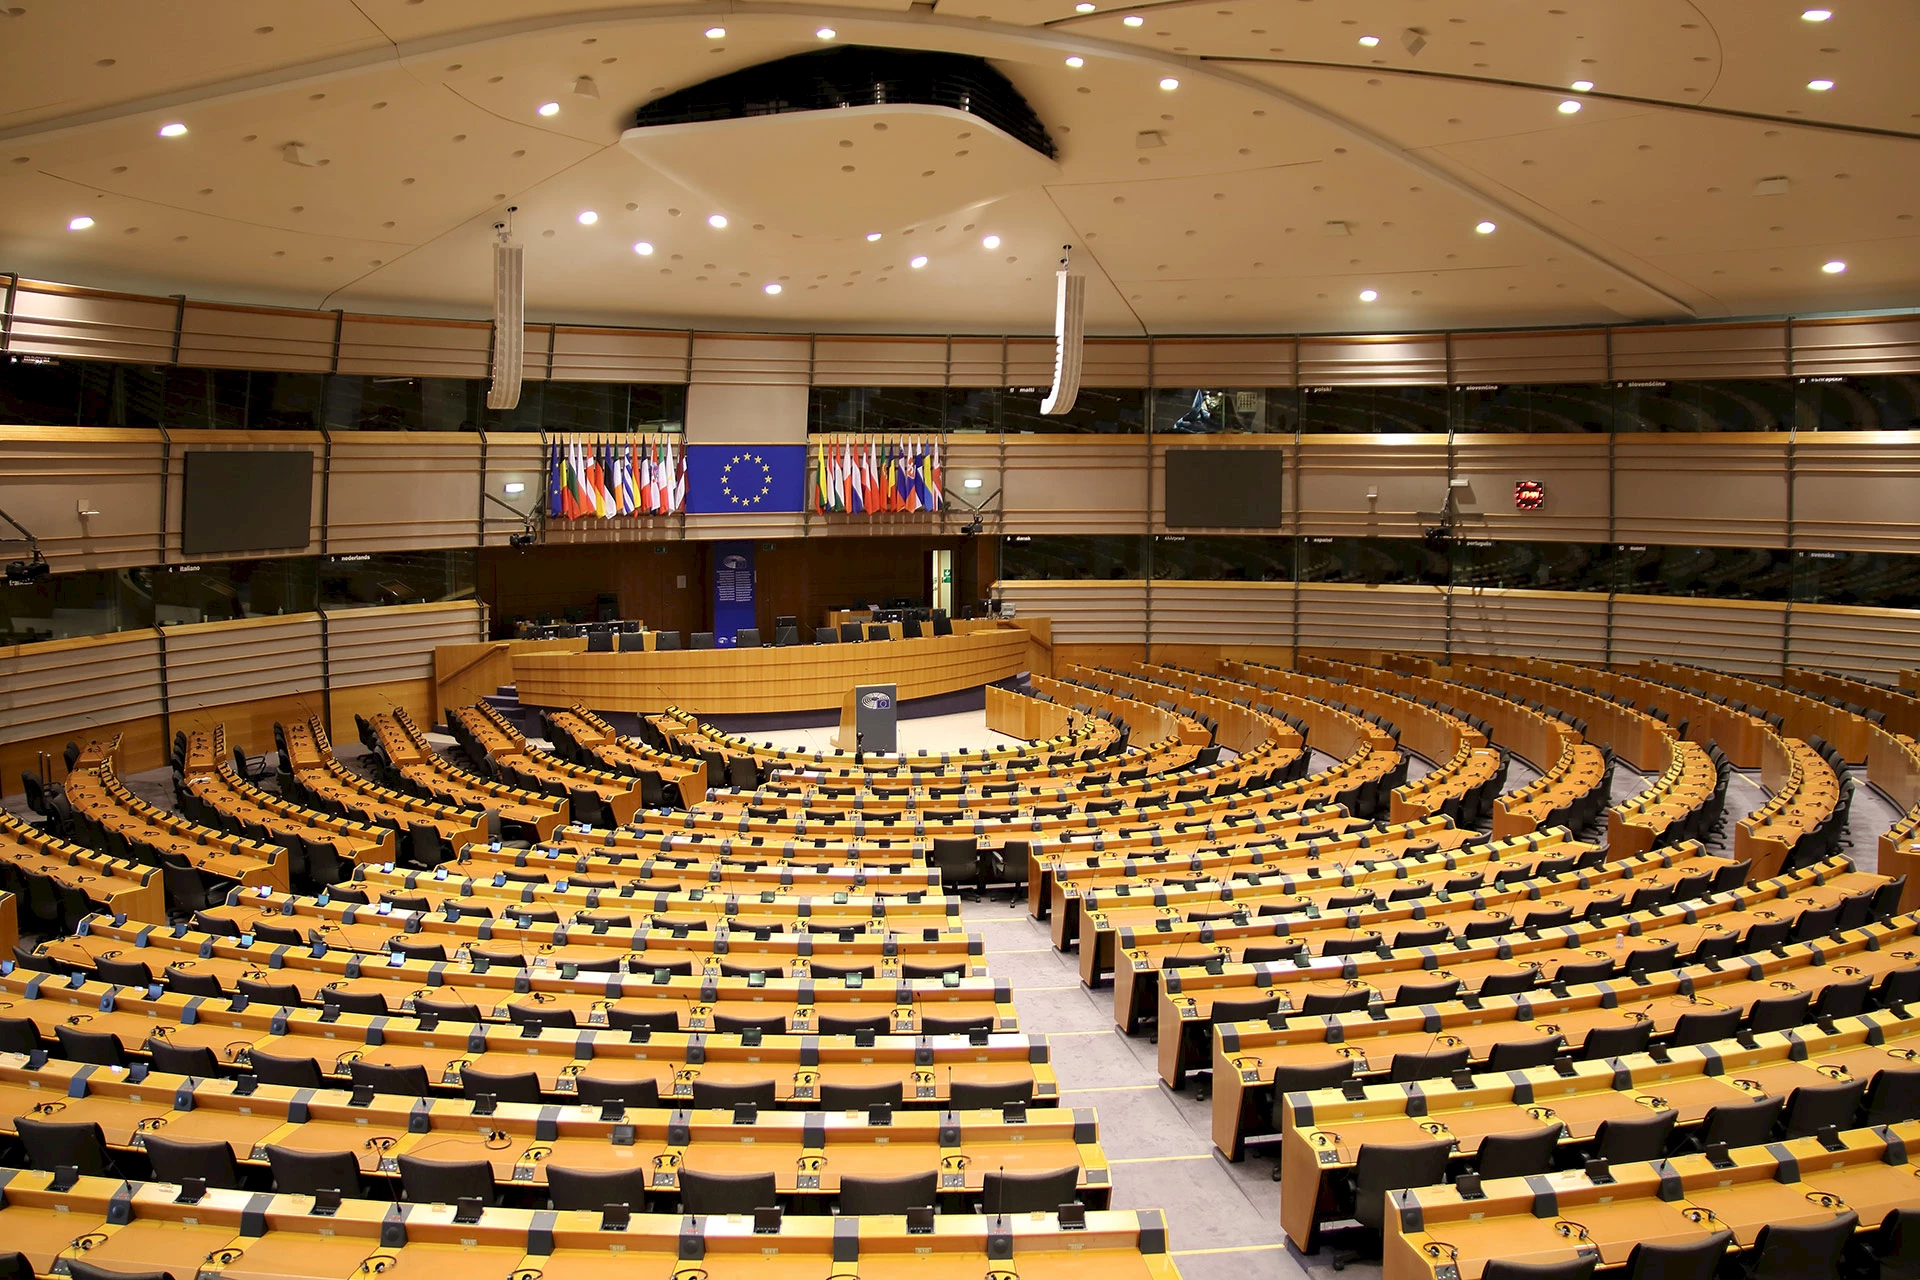 Parliamentary hemicycle at the European Union in Brussels.